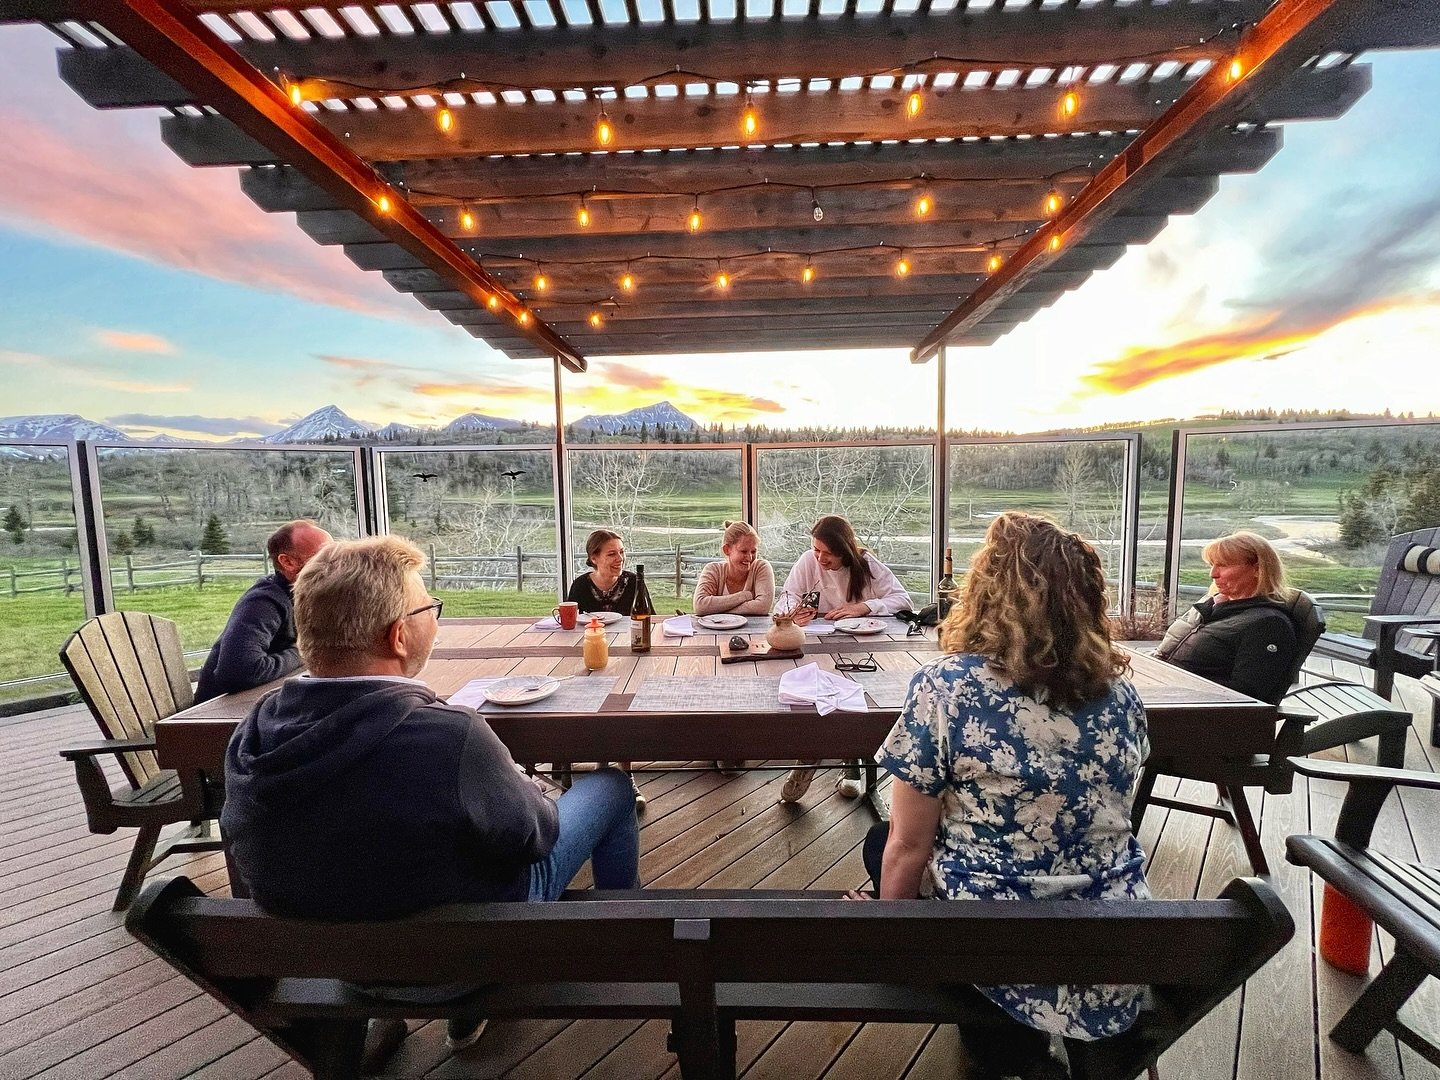 Enjoyed dinner, dessert, sunset and schnapps on the deck of The Lodge at Thanksgiving Ranch with new friends. 
FAM tour from Germany exploring @alberta.canada in advance of next weeks tourism marketing event, Rendevous Canada in Edmonton. Hosted by @